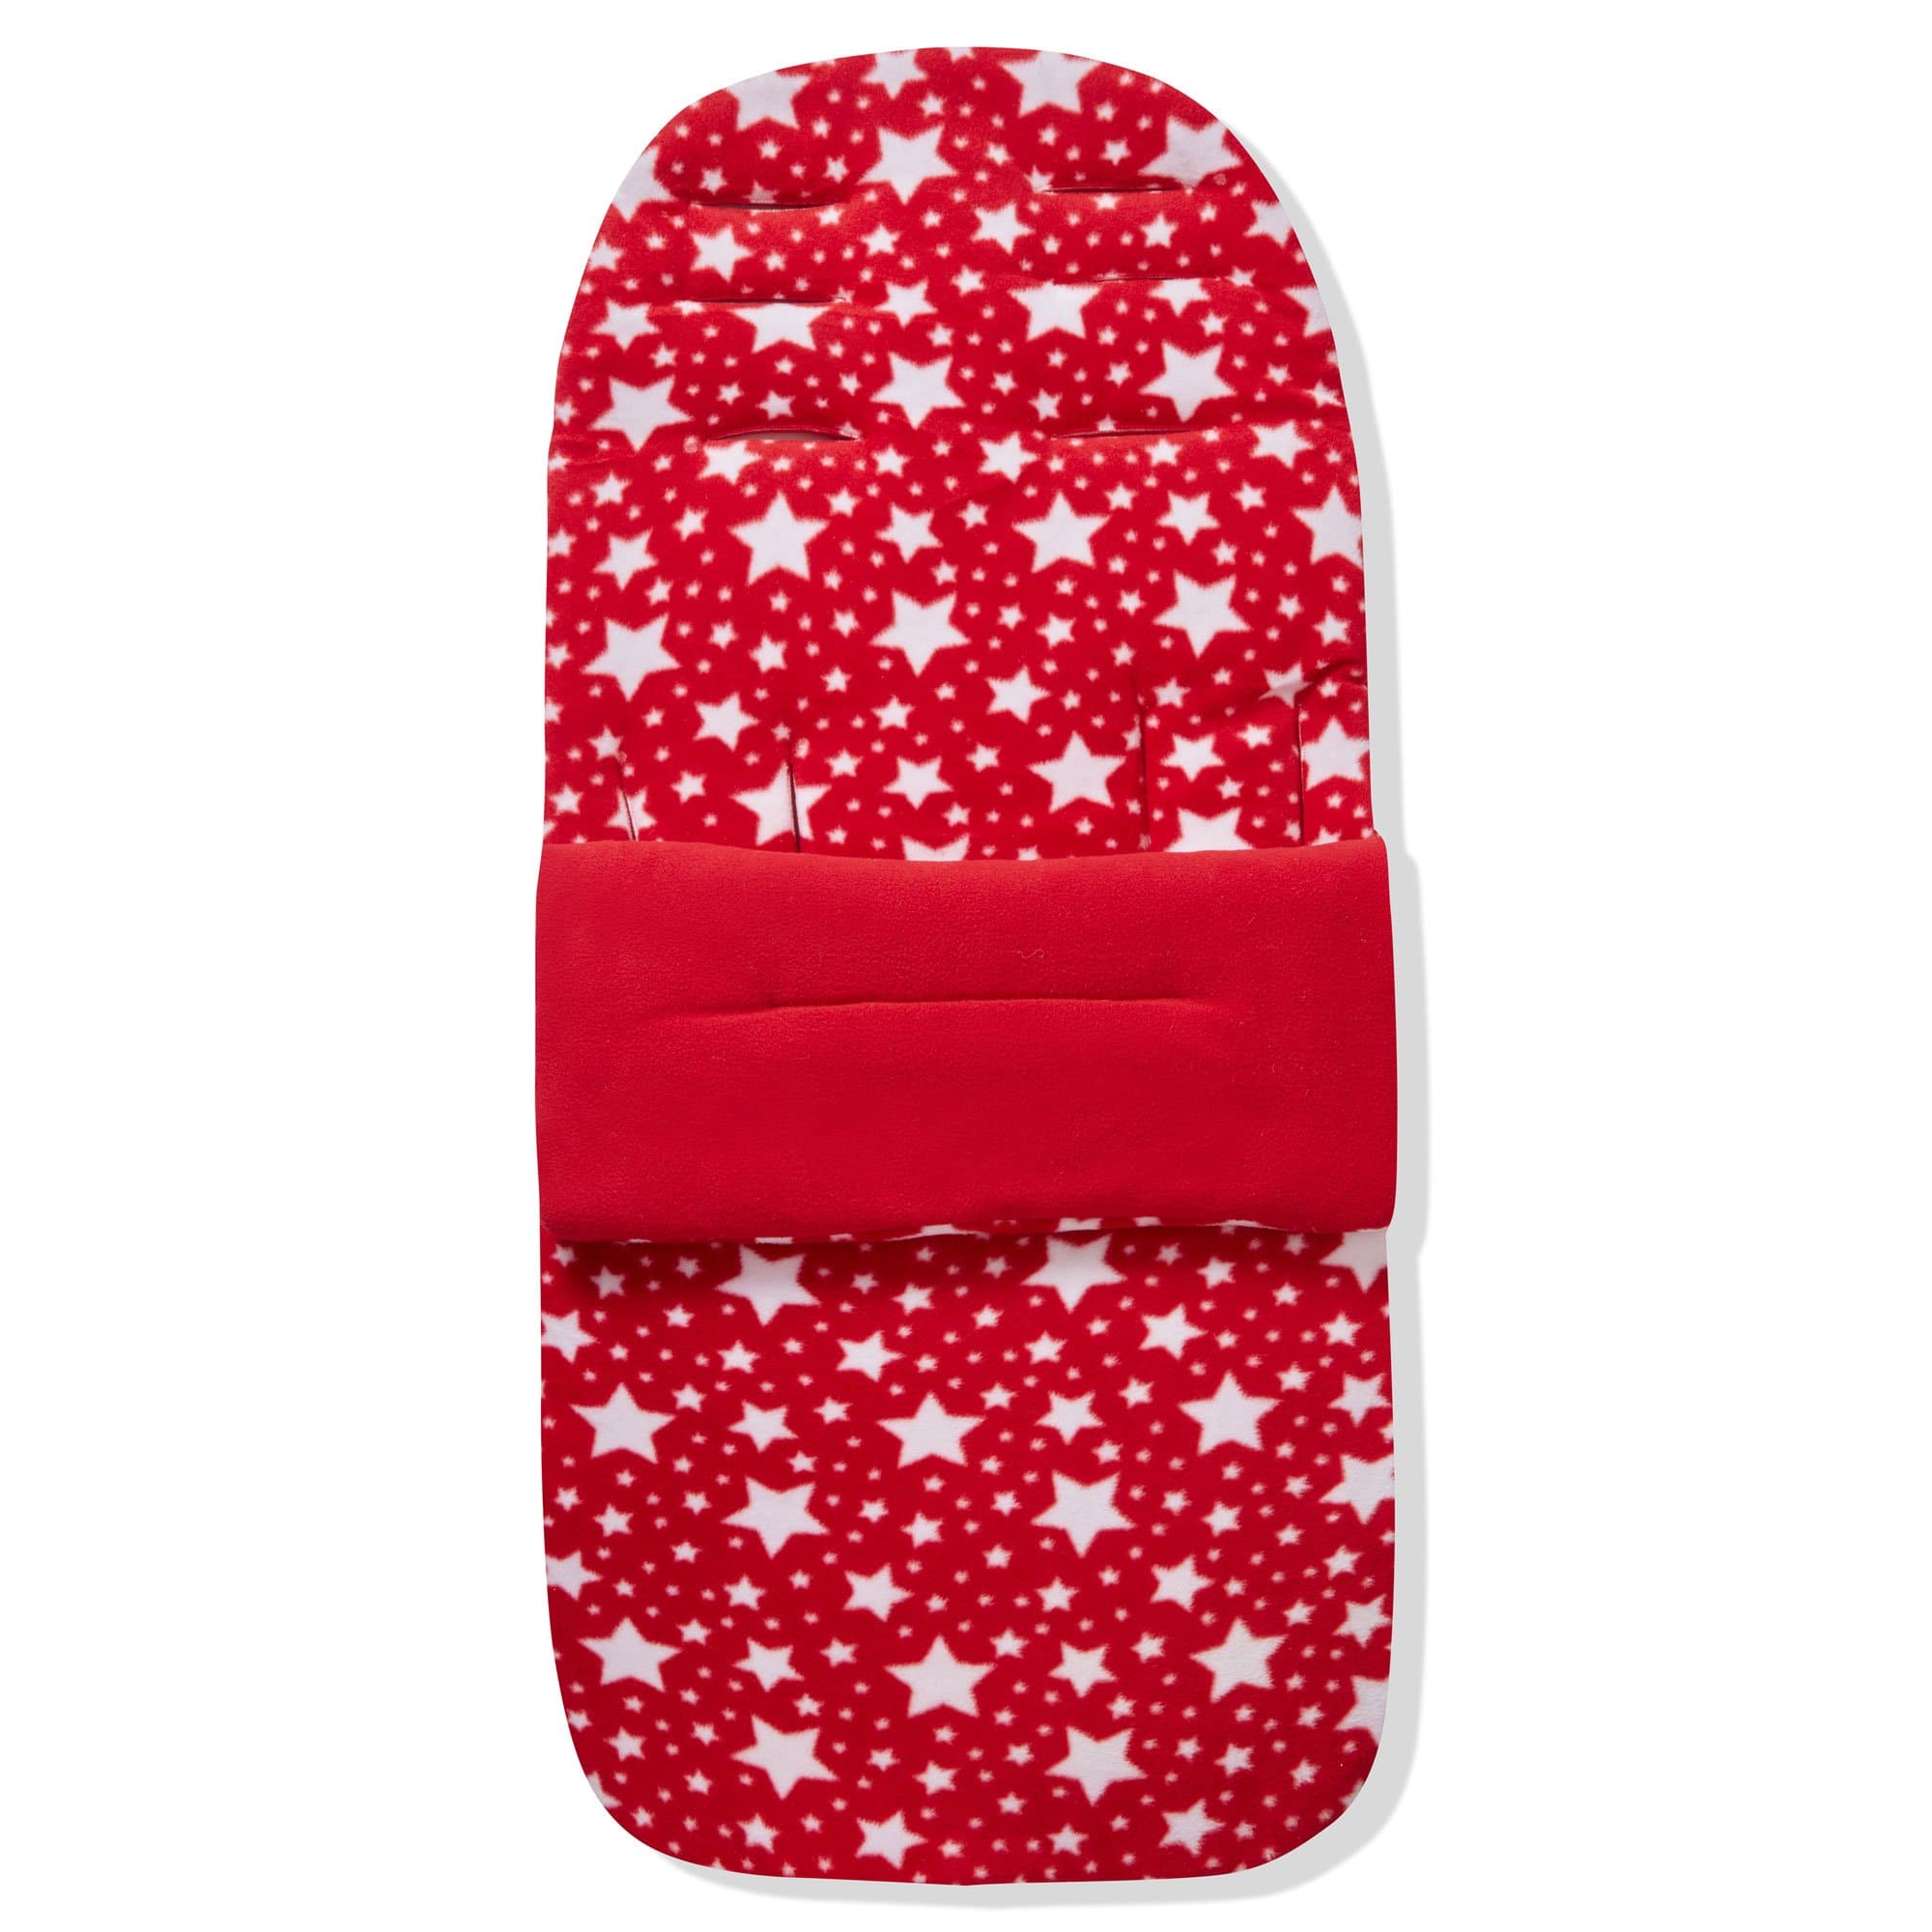 Fleece Footmuff / Cosy Toes Compatible with Quax - Red Star / Fits All Models | For Your Little One